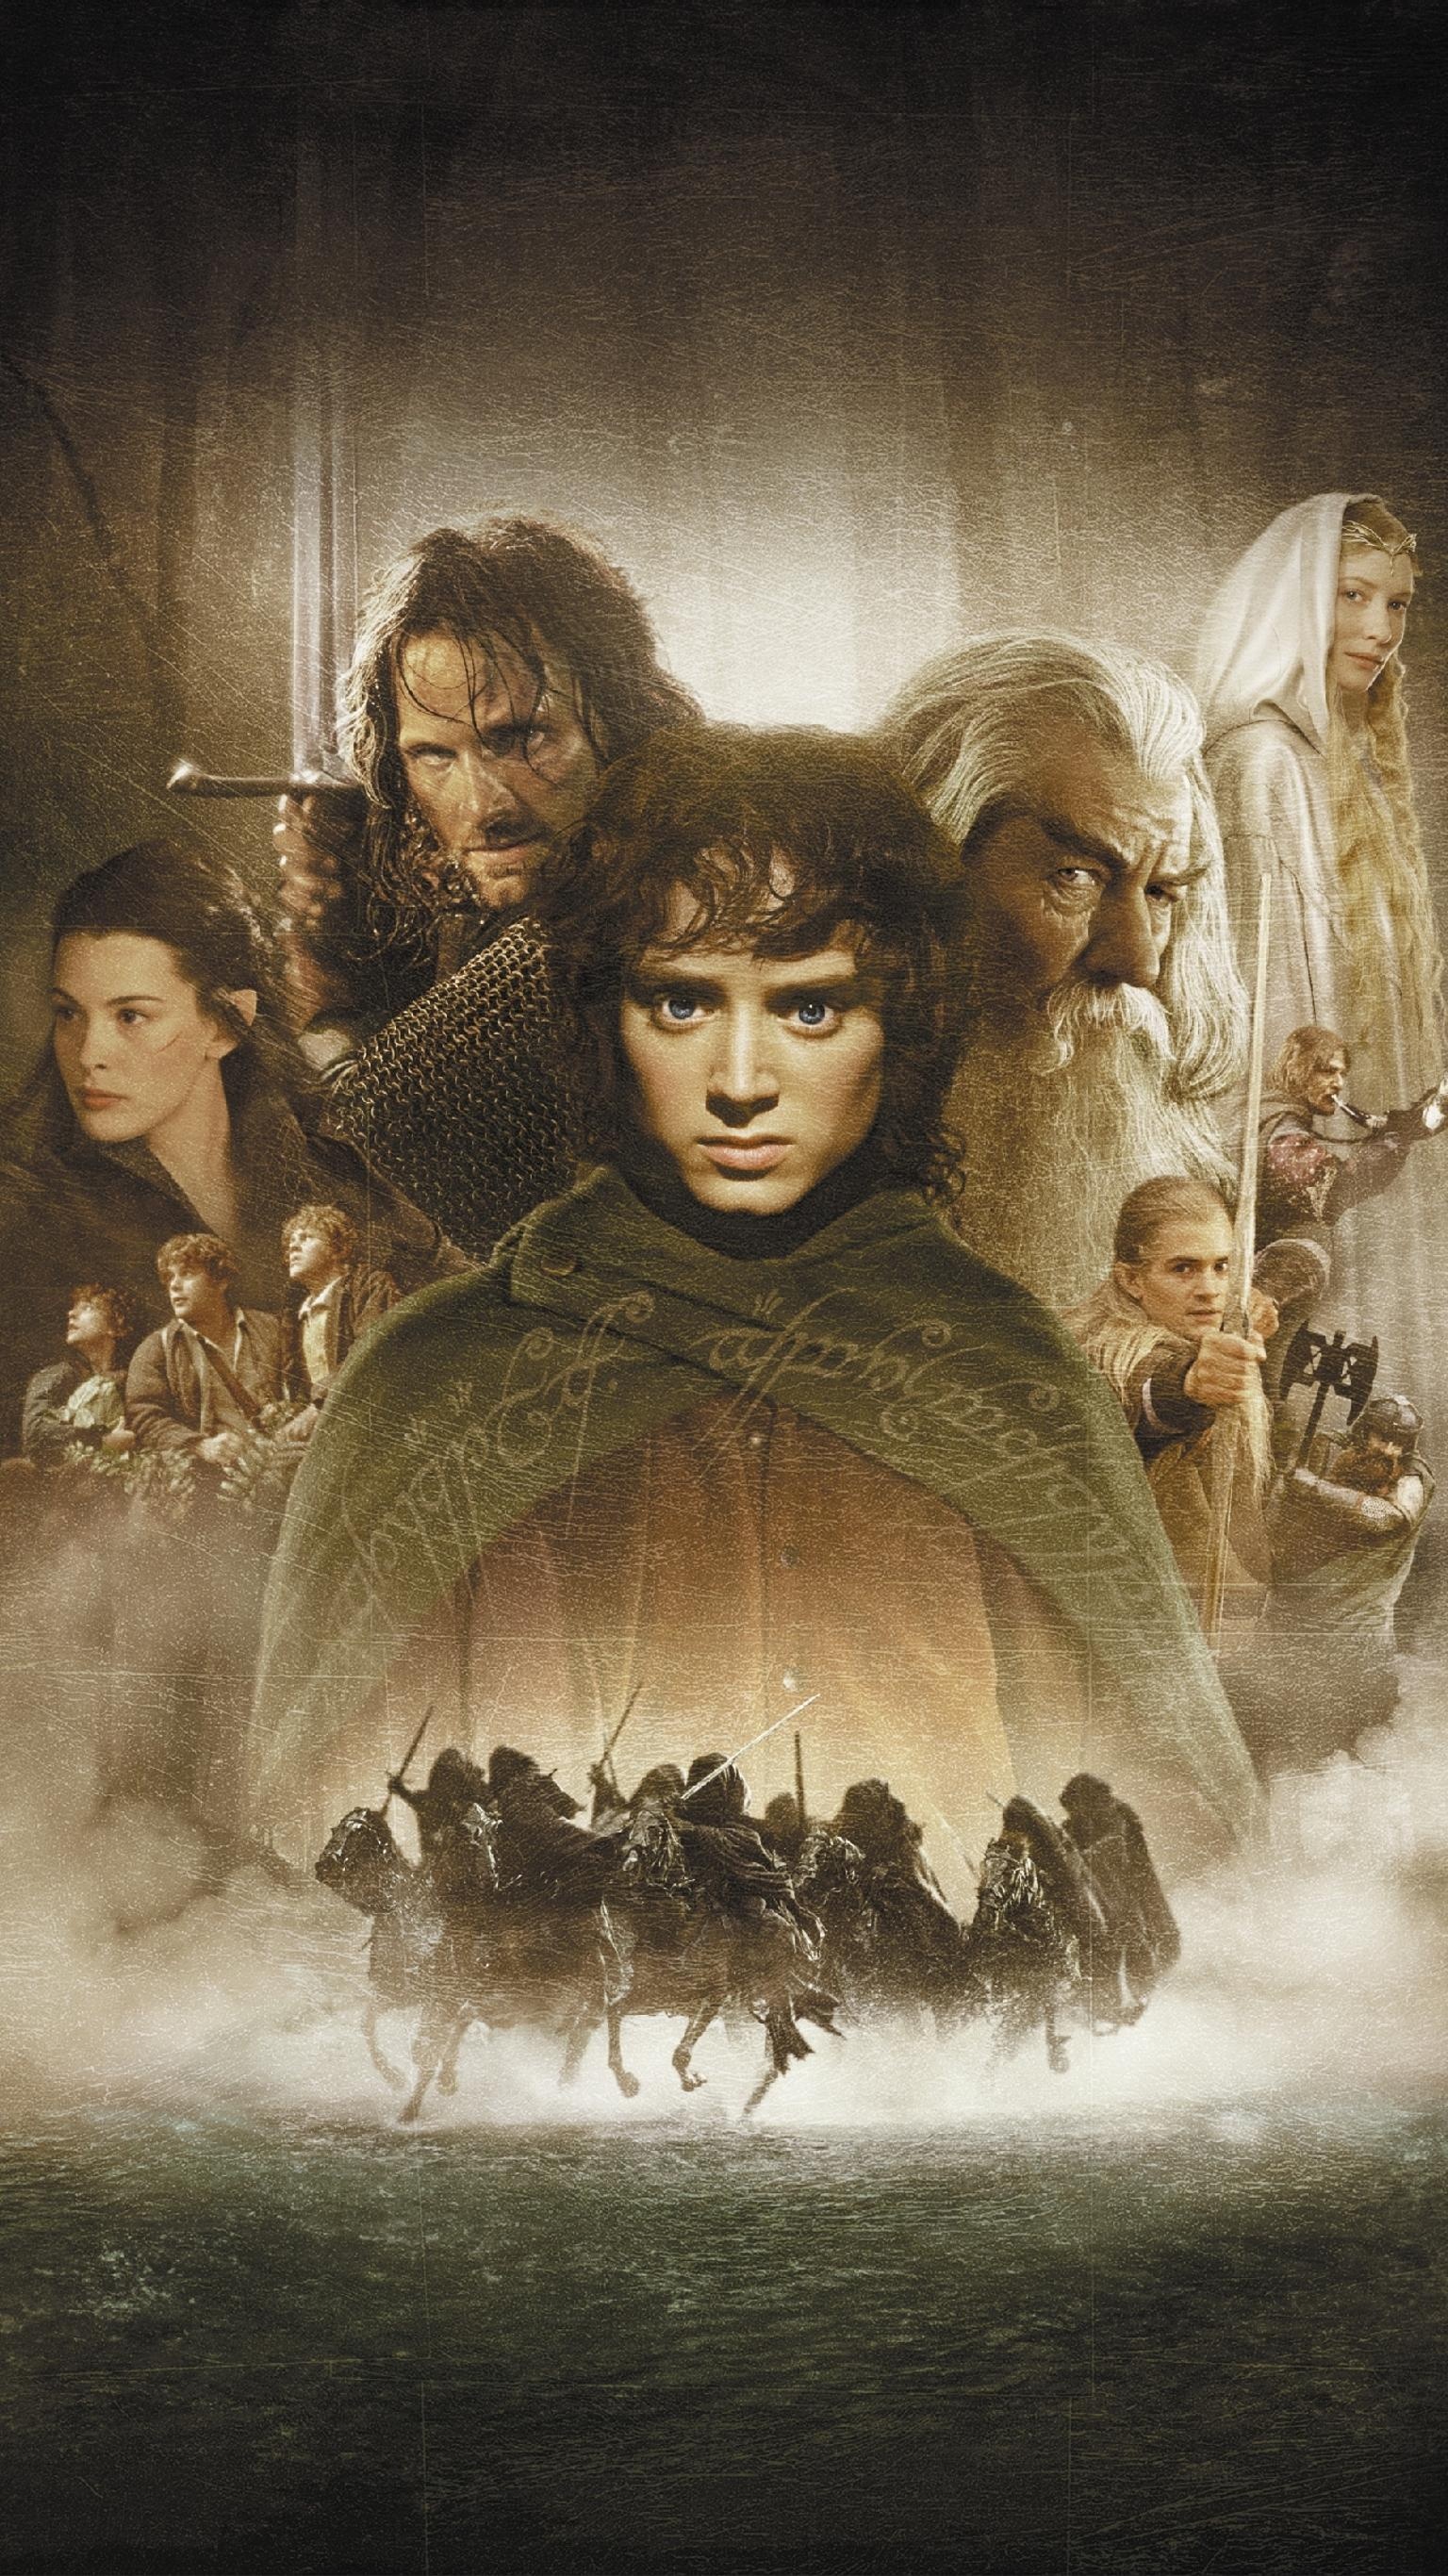 Hobbits, The Hobbit phone wallpapers, Unique backgrounds, Mobile customization, 1540x2740 HD Phone